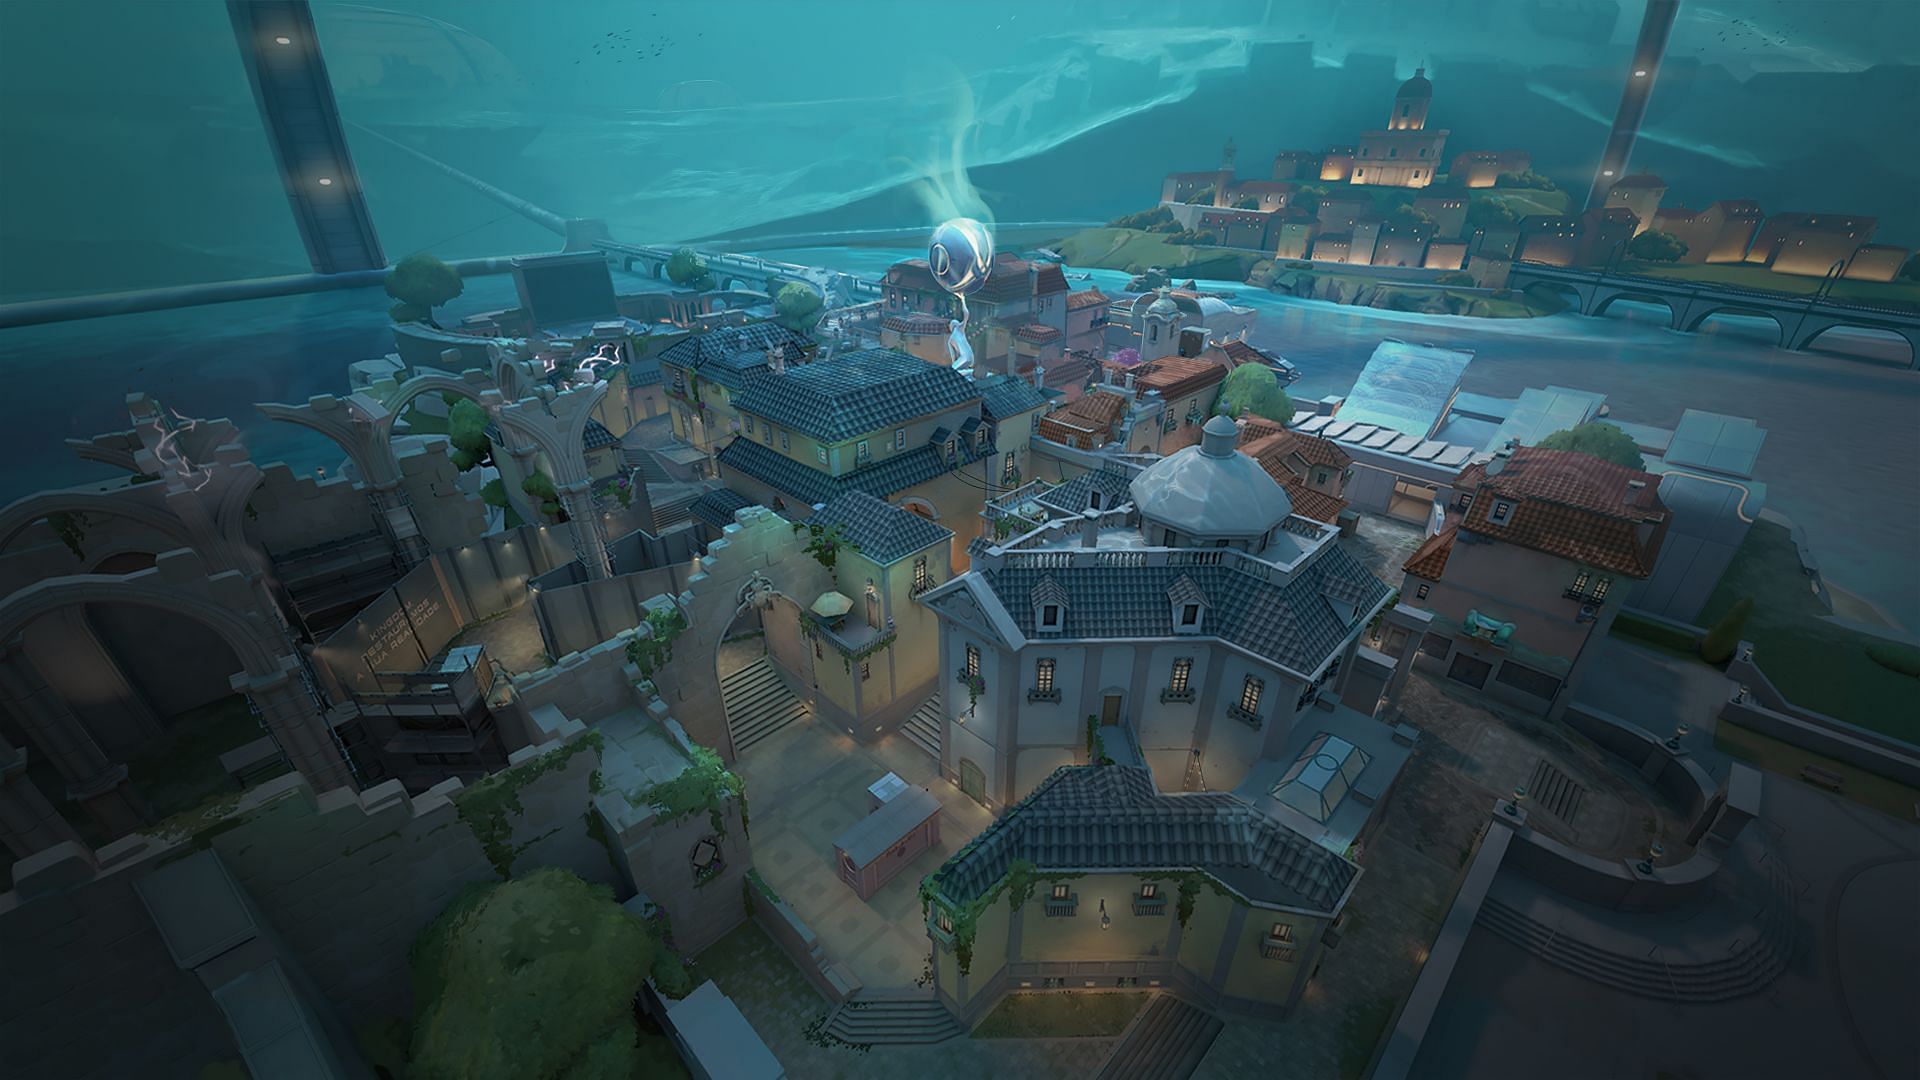 Valorant introduces new map Pearl in Episode 5 Dimension (Image via Riot Games)